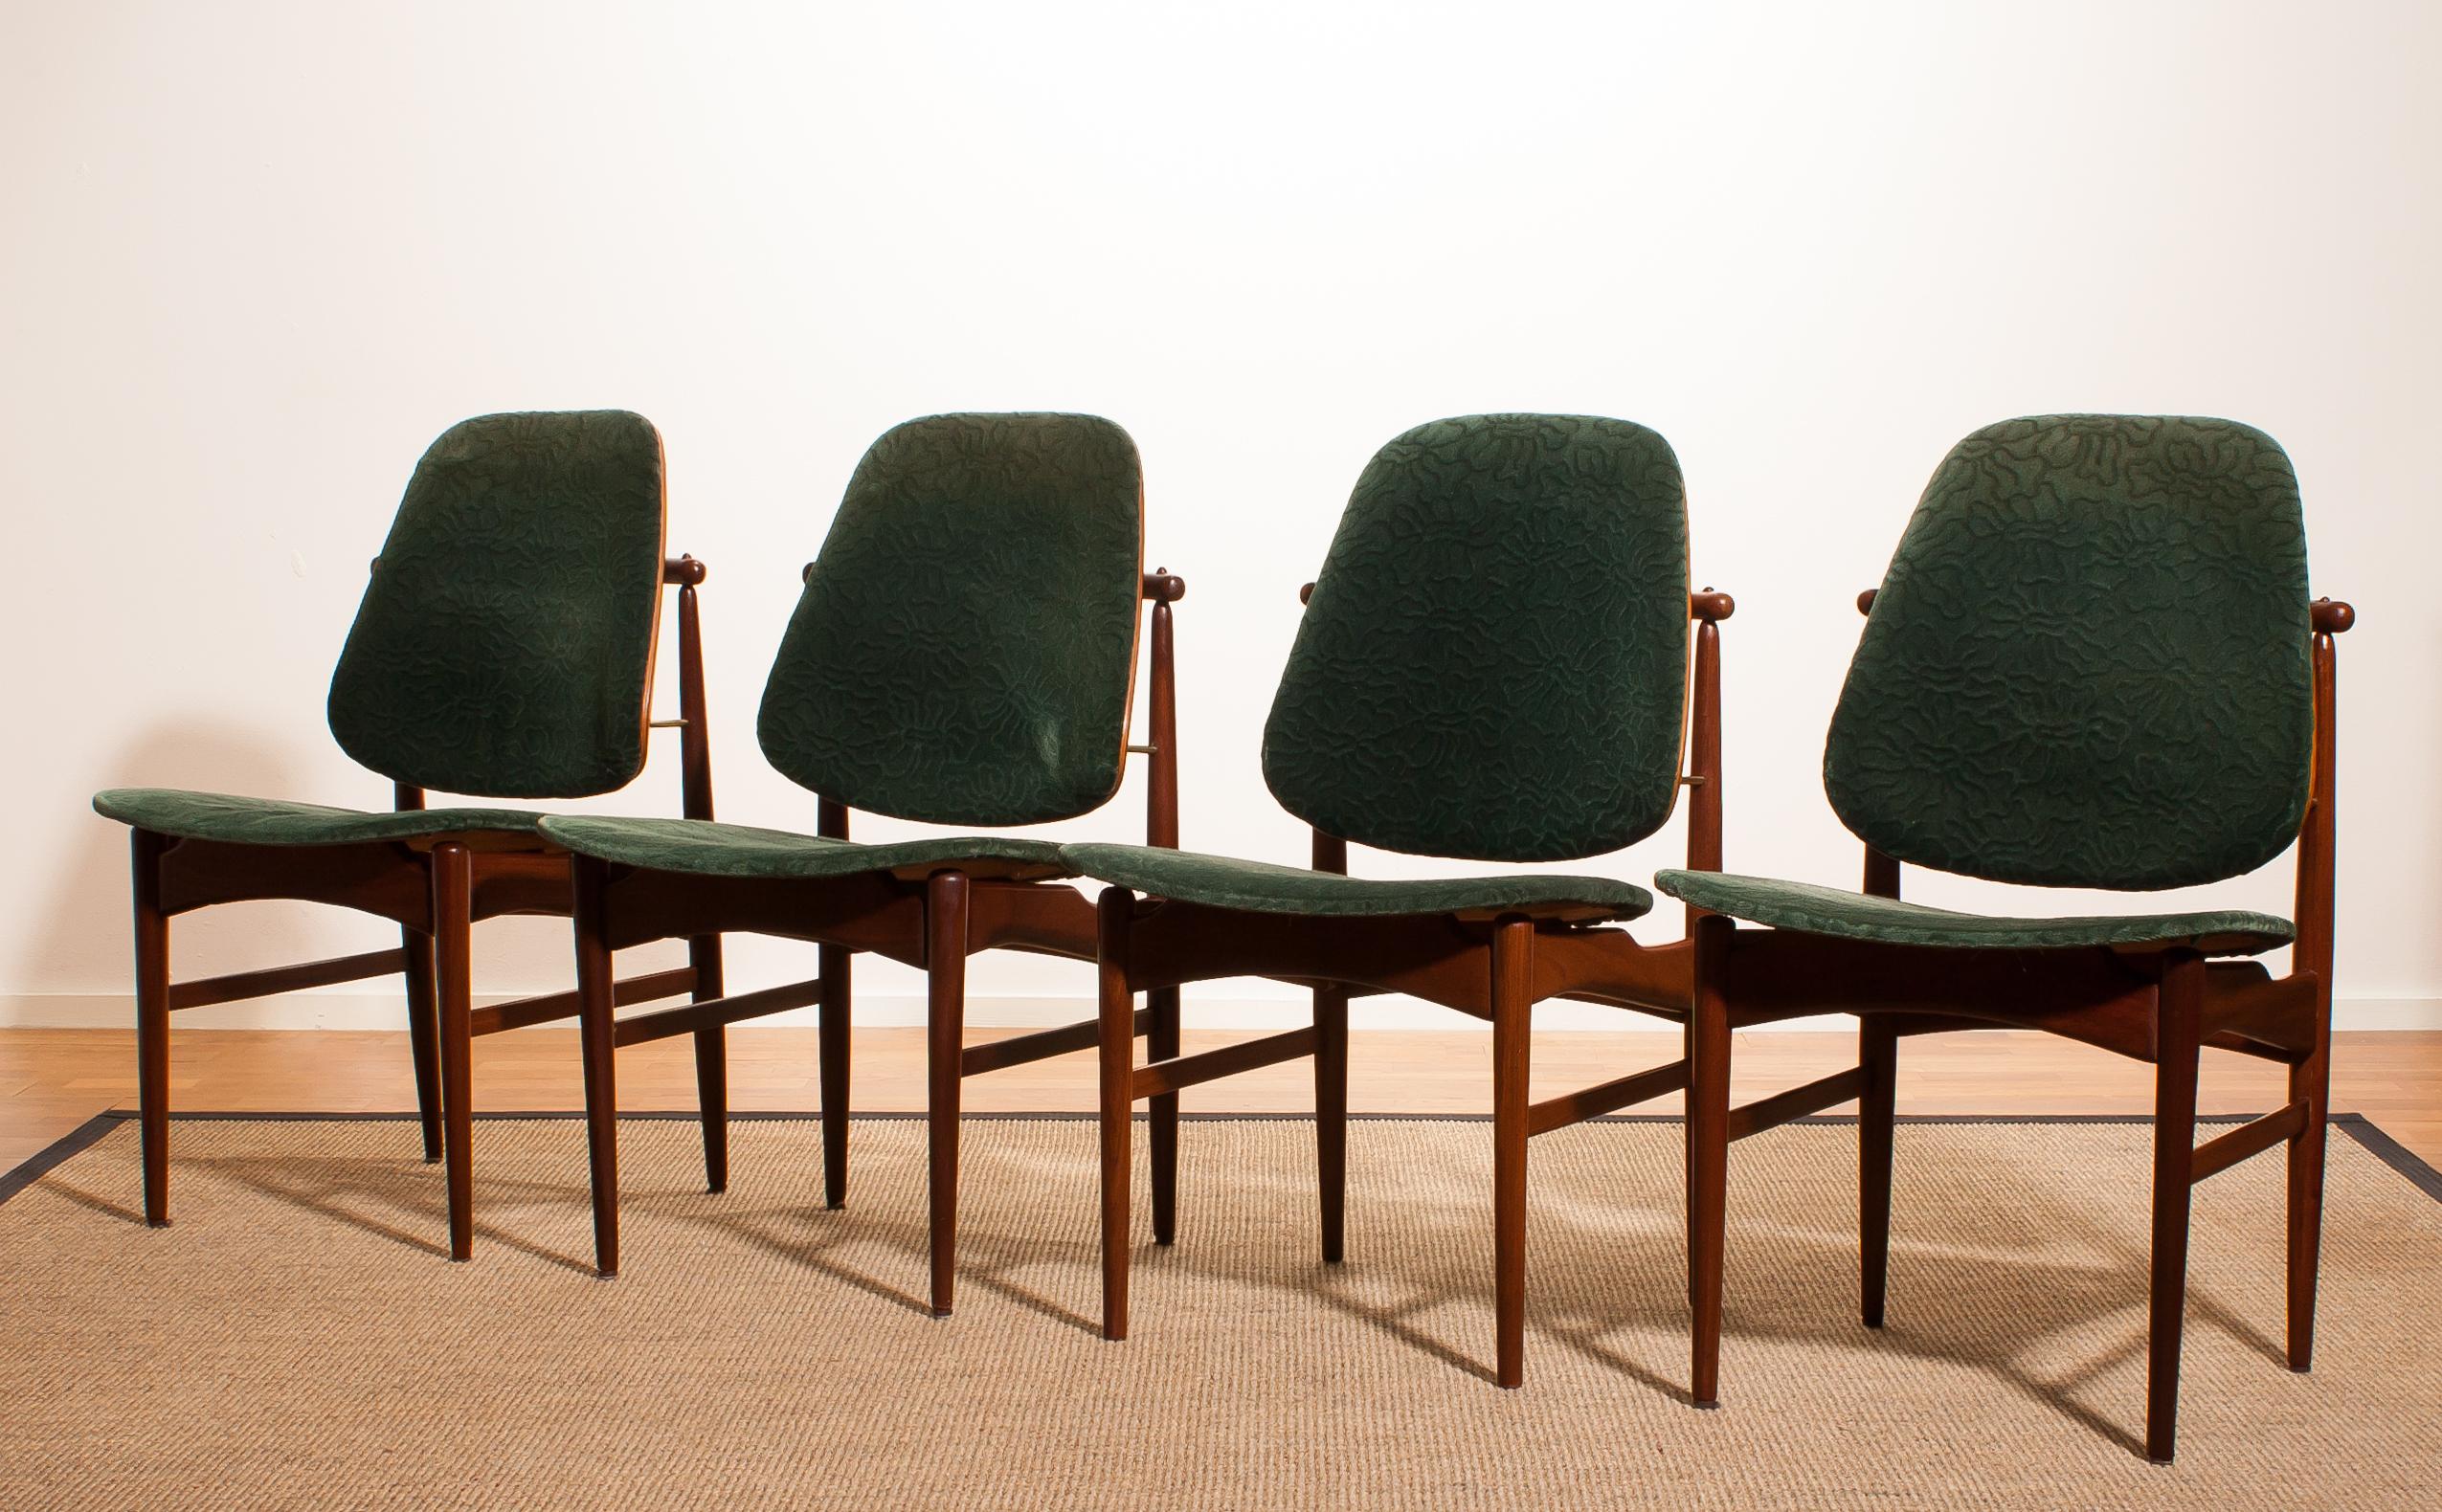 Beautiful set of four Arne Vodder design armchairs made by France & Daverkosen, Denmark. 
Seat and back covered in original bottle-green velvet fabric. 
These chairs sit extremely comfortable and are beautifully finished with beautiful bronze